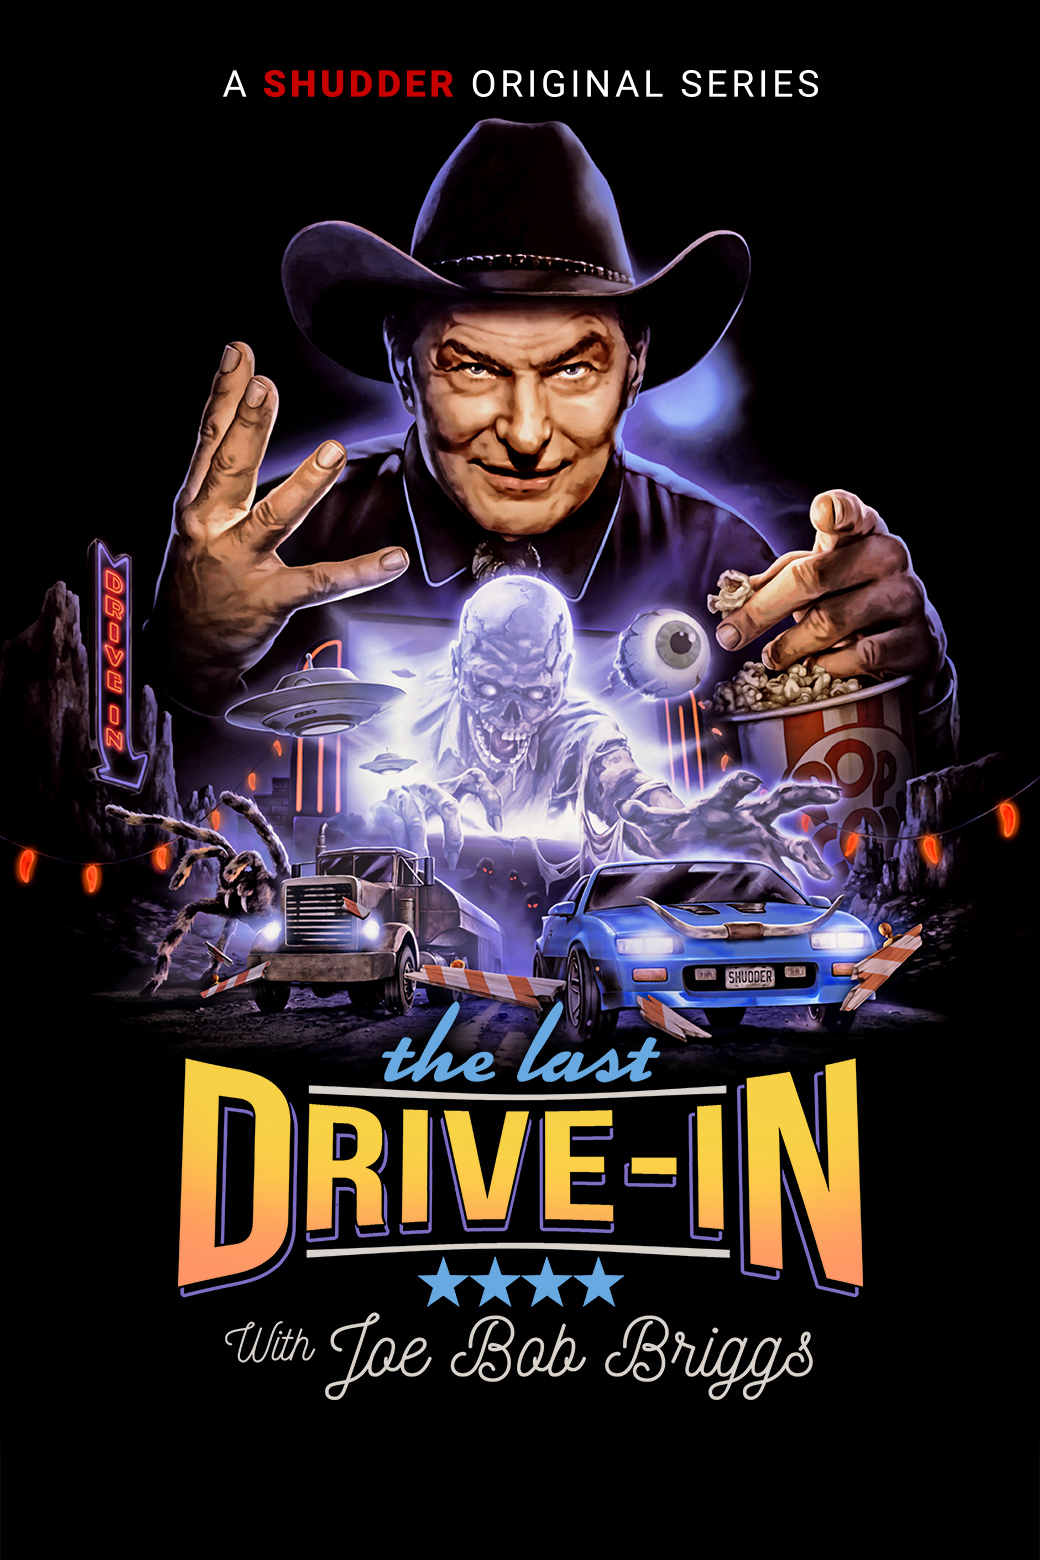 series_tms_SHU1496207_last-drive-in-s4__img_poster_2x3